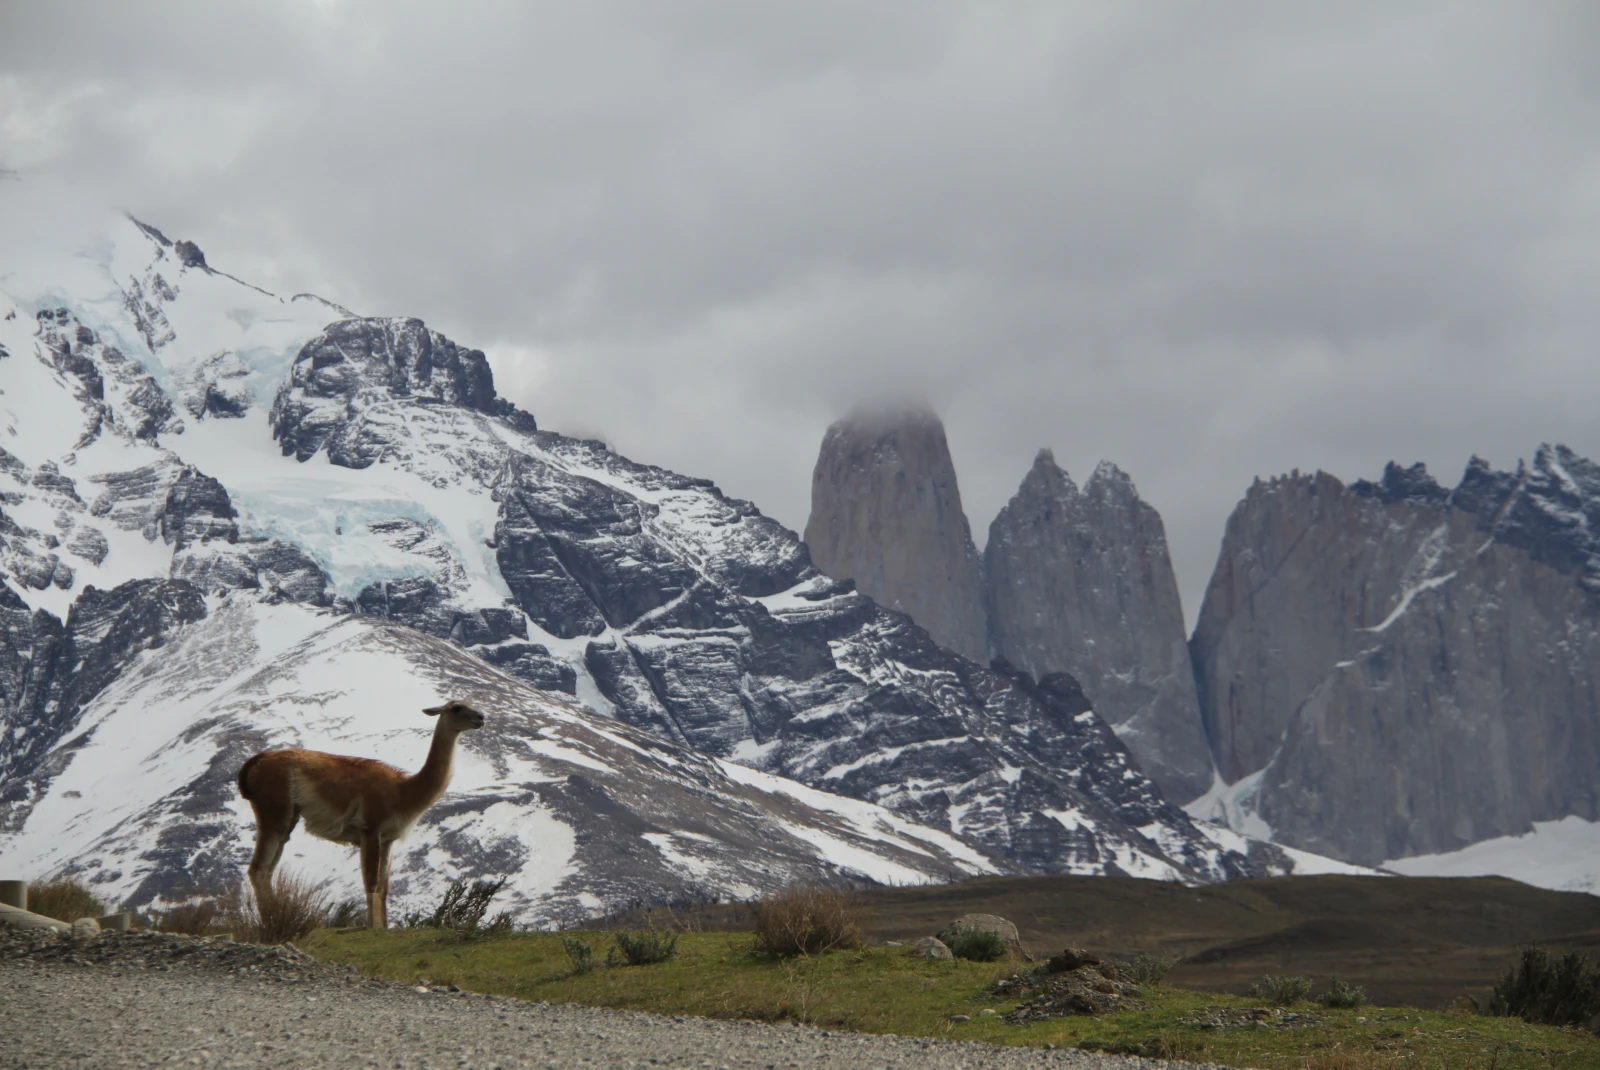 A tan llama standing on green grass with white snow-capped grey rock mountains in Torres del Paine National Park near El Calafate, Argentina.